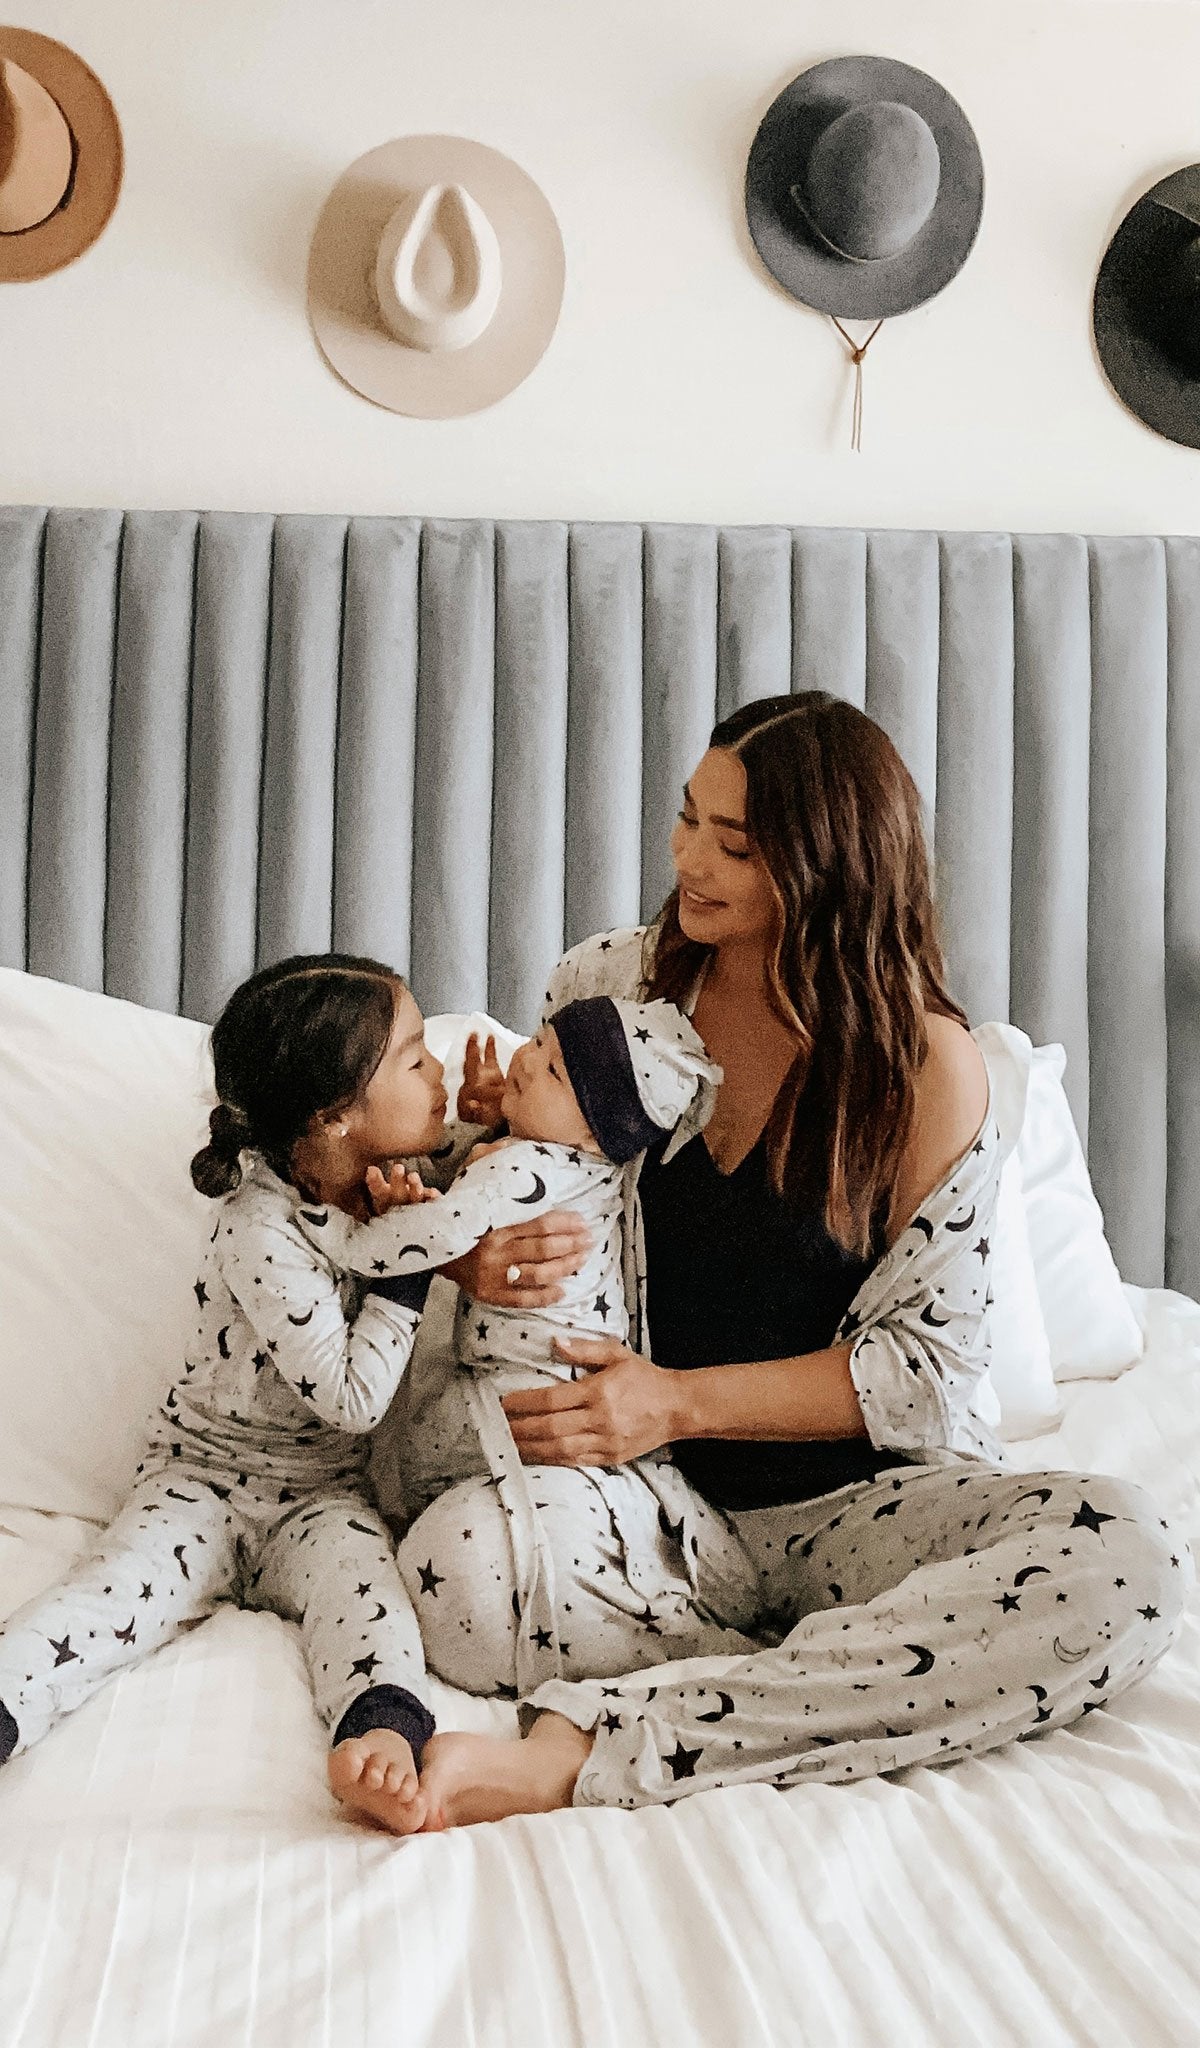 Everly Grey Analise During & After 5-piece Maternity/nursing Sleep